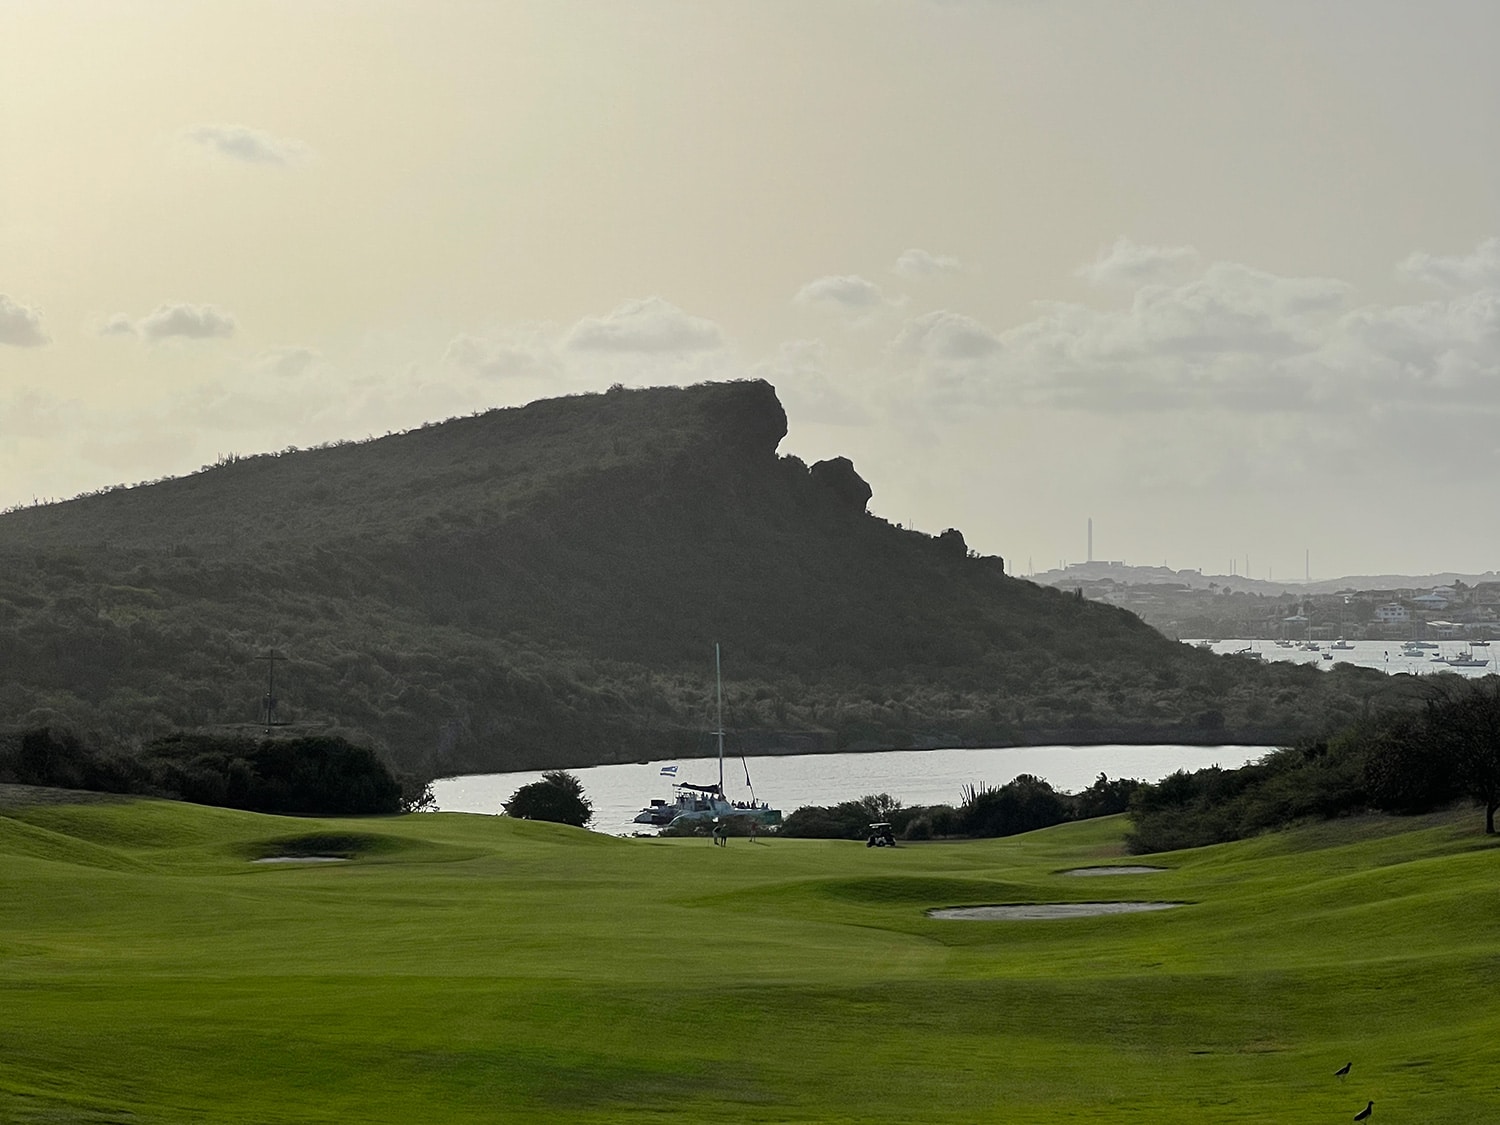 A view of the green and water on Hole 18 at Old Quarry Golf Course on the Dutch Caribbean island of Curaçao.